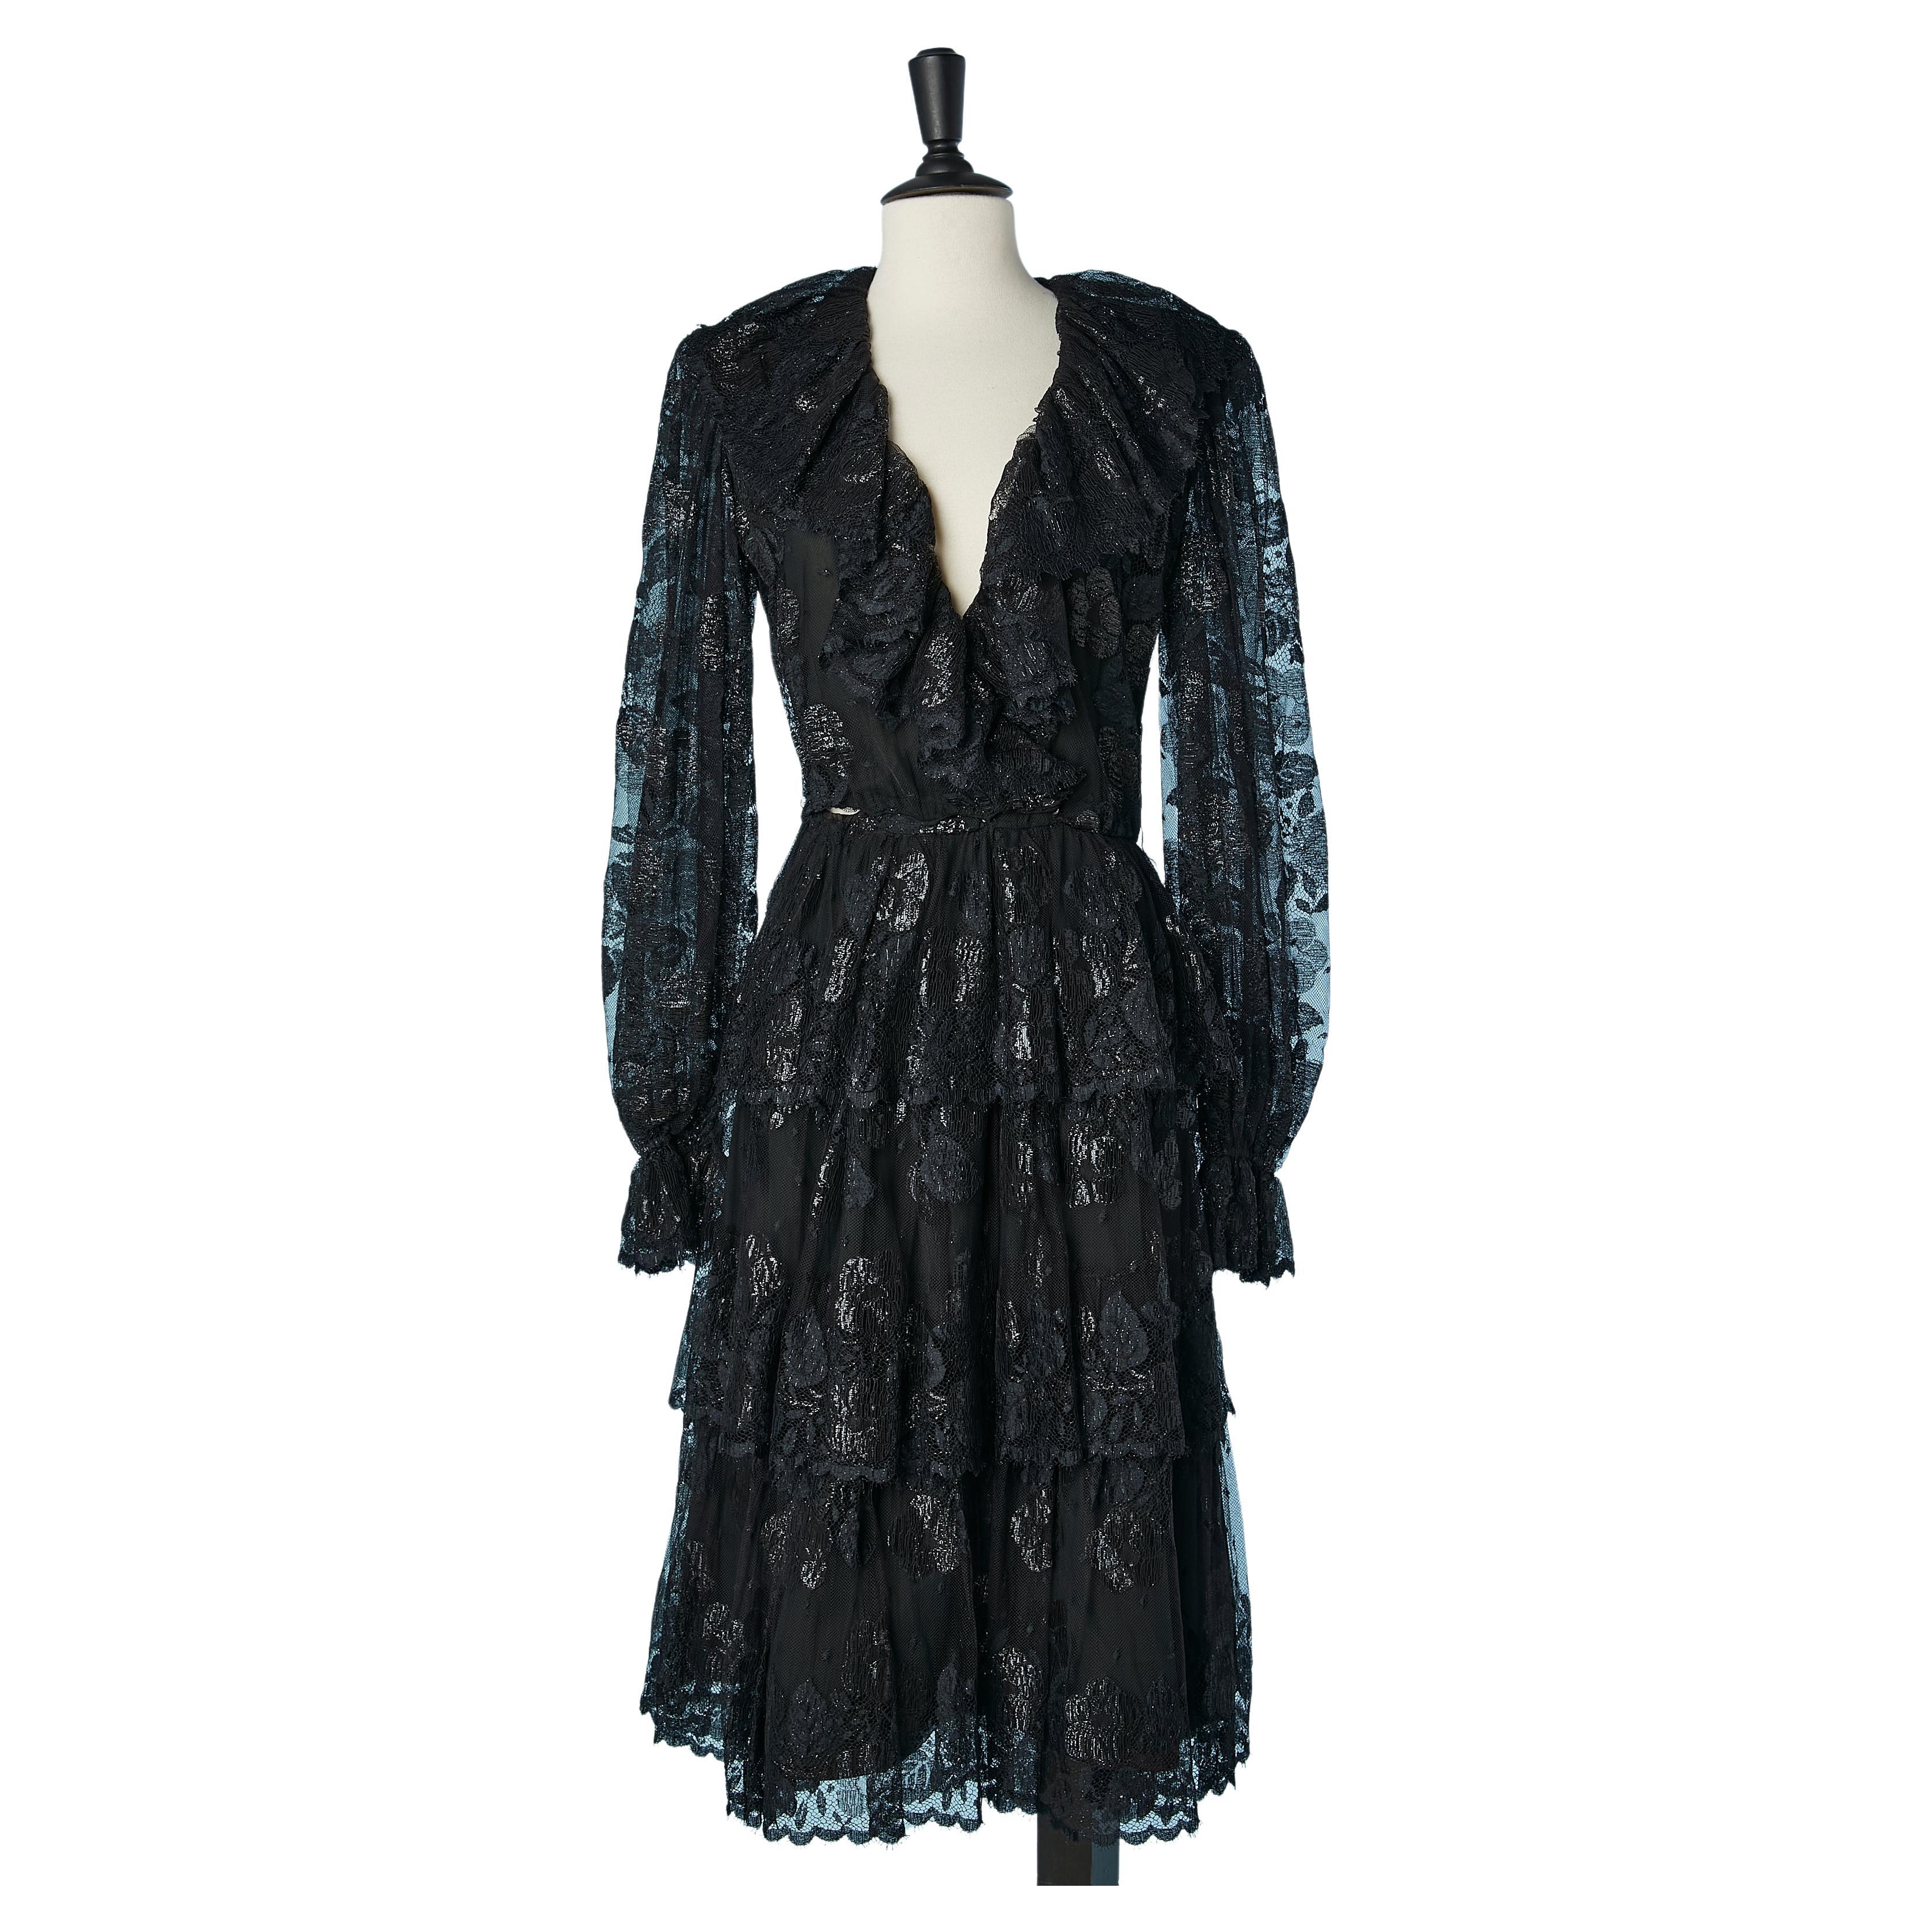  Cocktail dress in black lace and lurex with ruffles Jean-Louis Scherrer For Sale